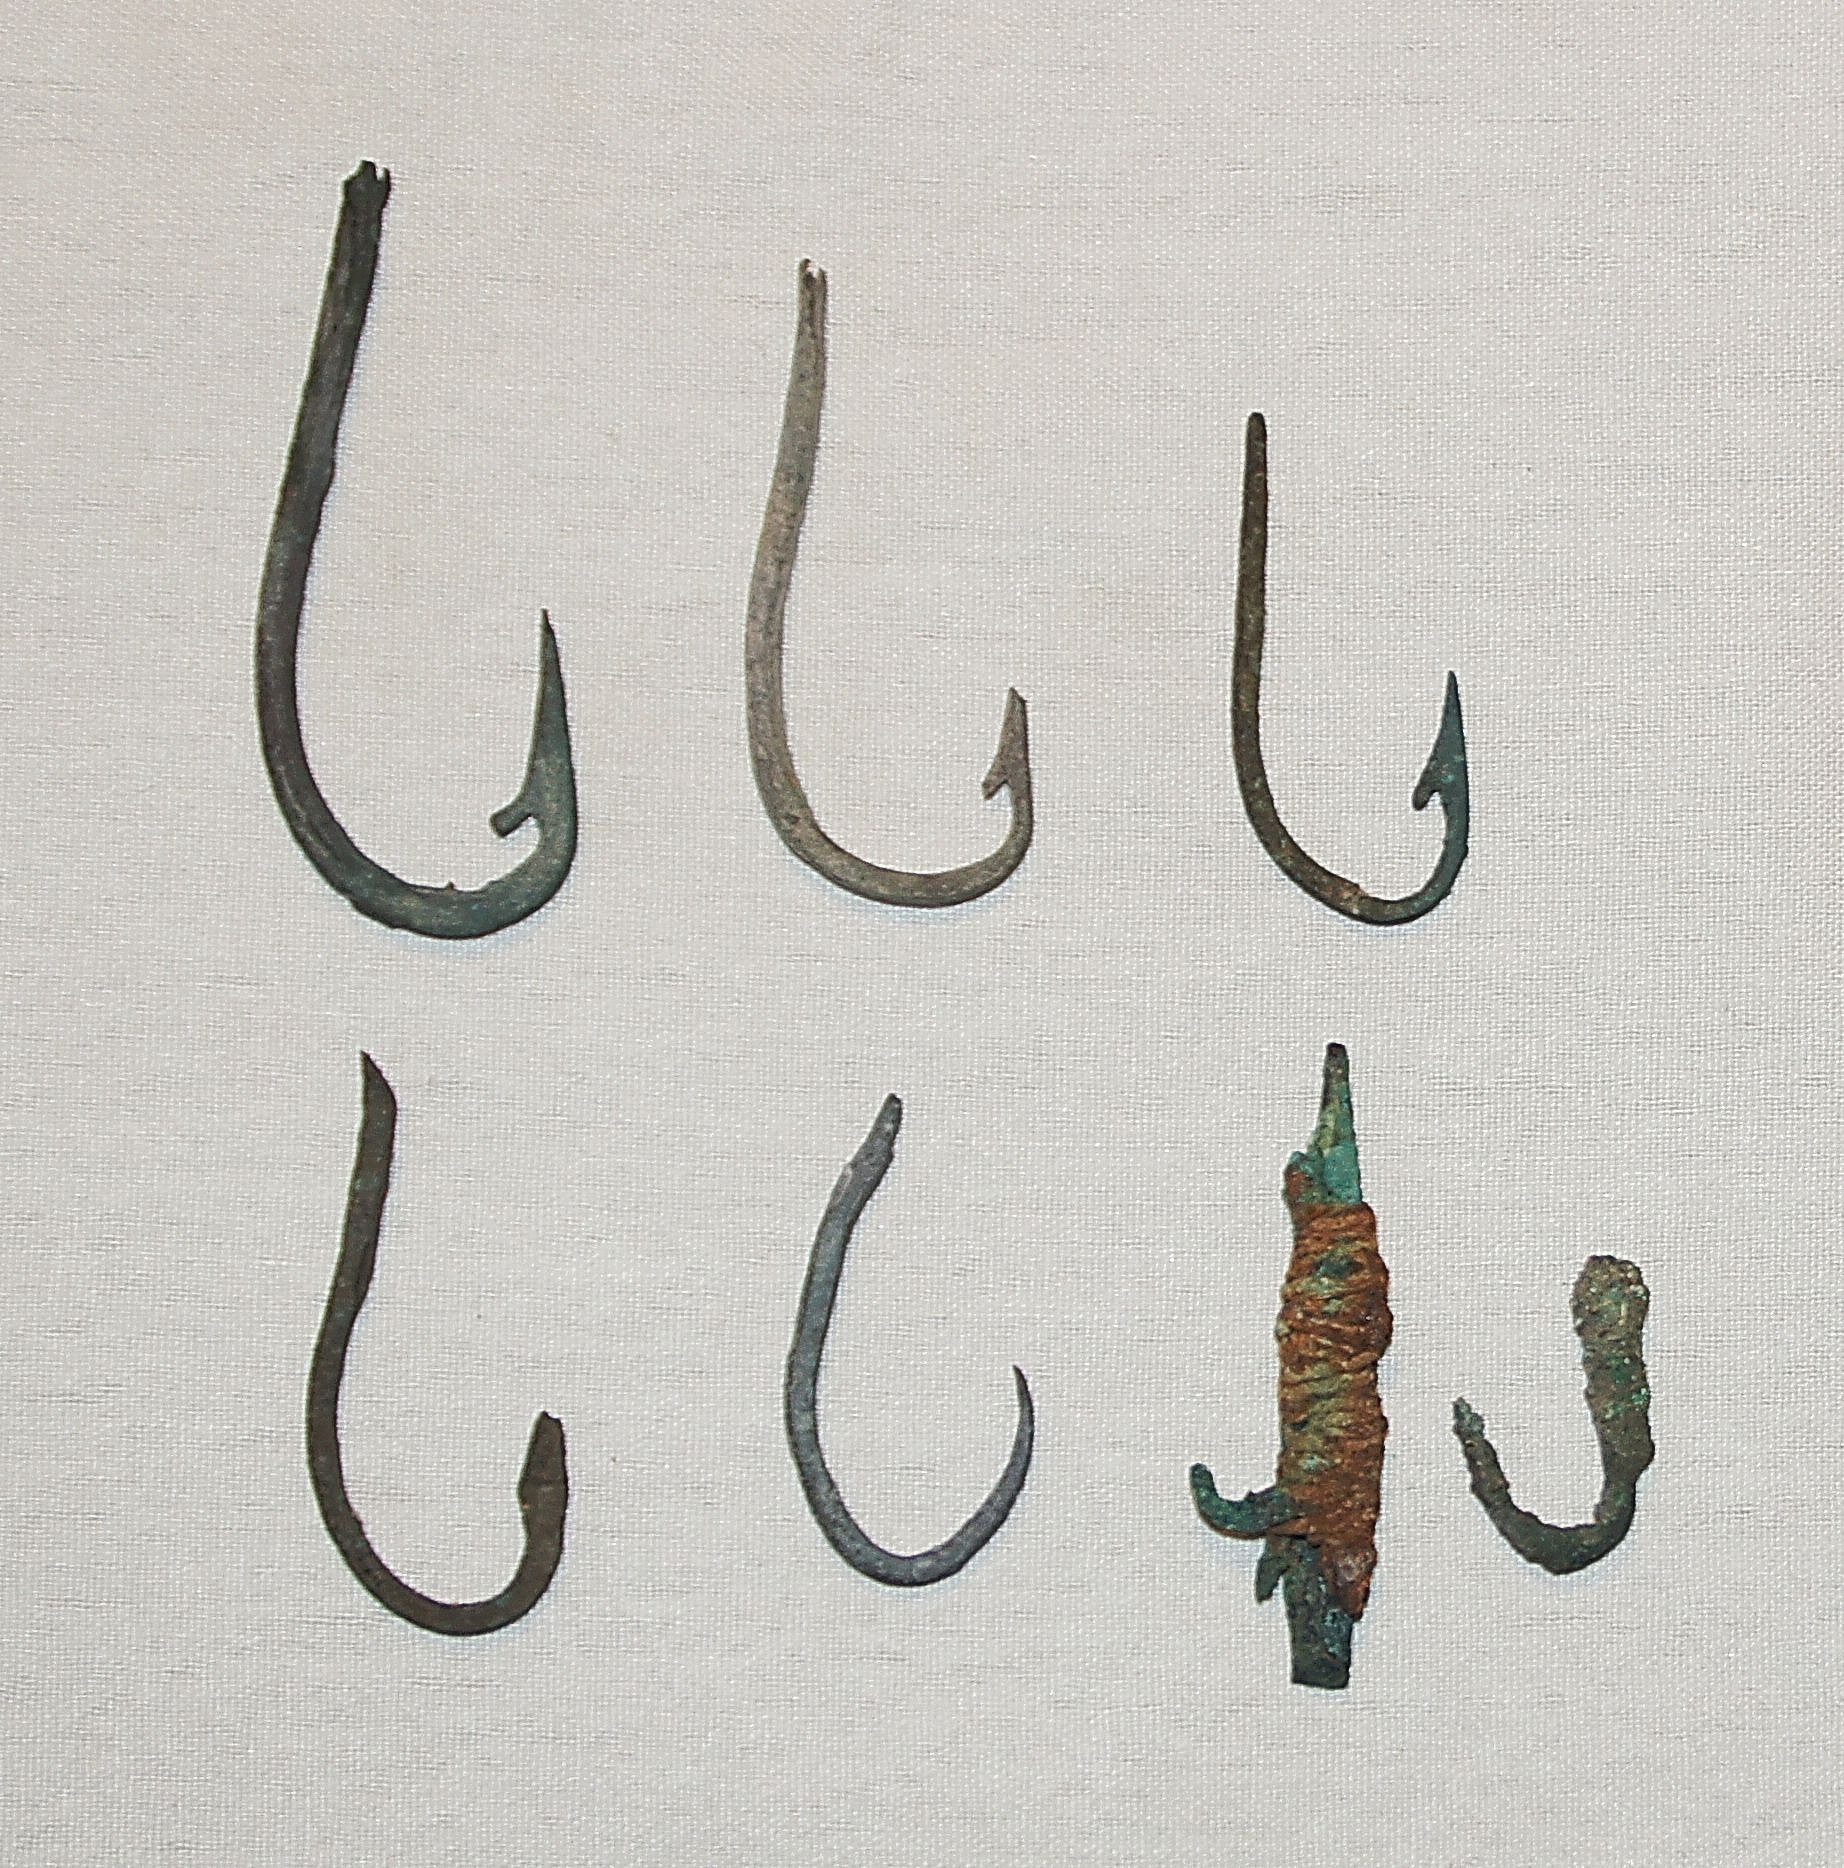 Chile, Late Copper Fish Hooks with Barbs
These barbs were made by hammering and chiseling the copper hooks.  One hook demonstrates how a line was attached to the hook by tying a copper strip around the shaft so it would not slide off.
Media: Metal
Dimensions: Lengths Vary: 1.50" - 2.5”
N6024